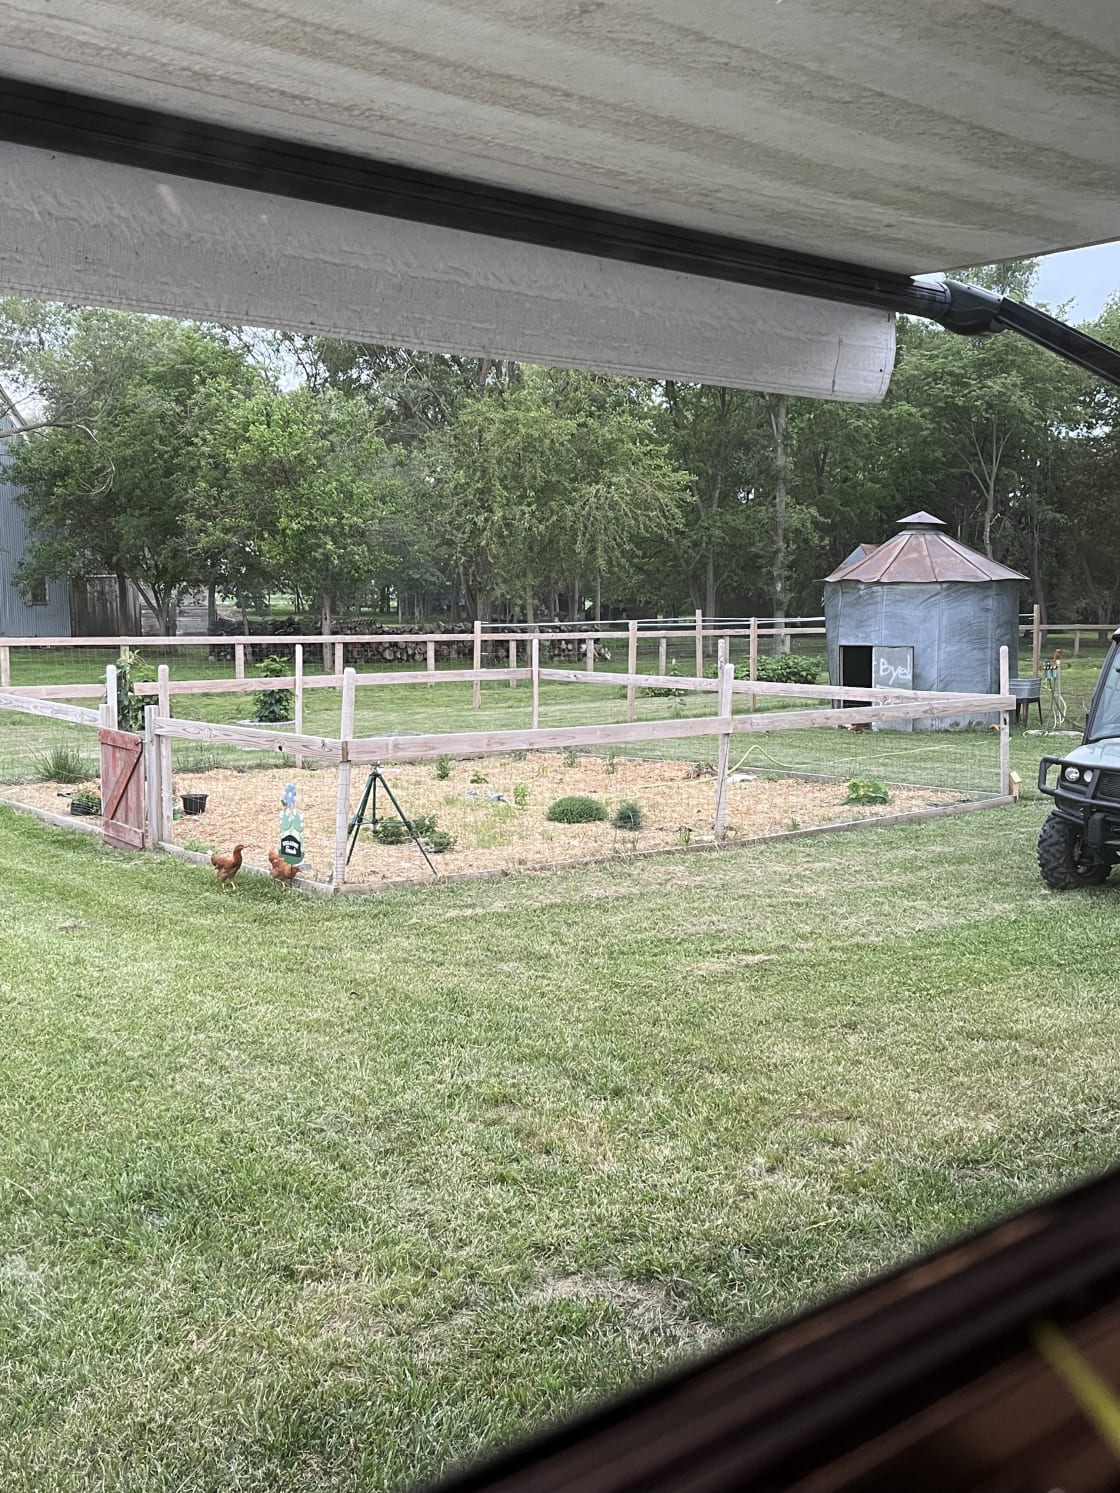 Your view of our garden and maybe our chickens. Photo taken in early June. Site #1.